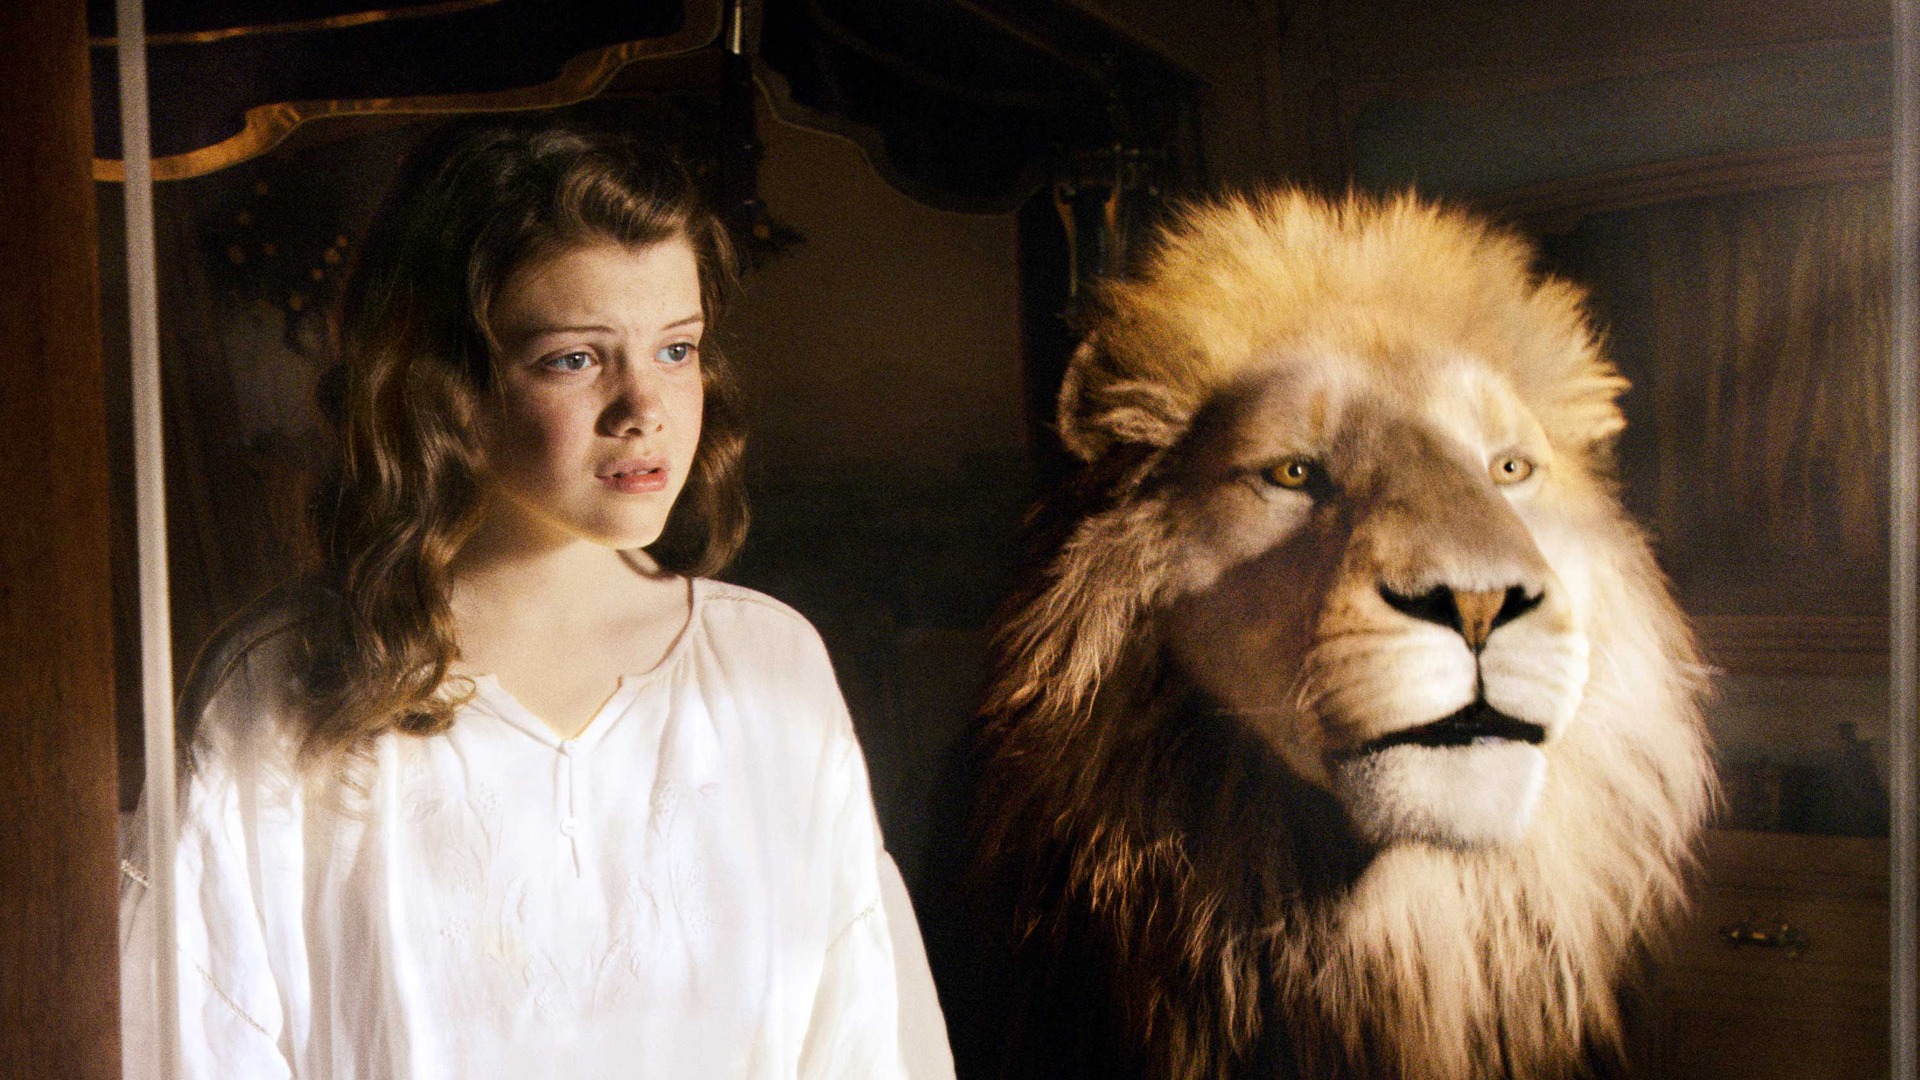 The Chronicles of Narnia: The Voyage of the Dawn Treader wallpapers #3 - 1920x1080